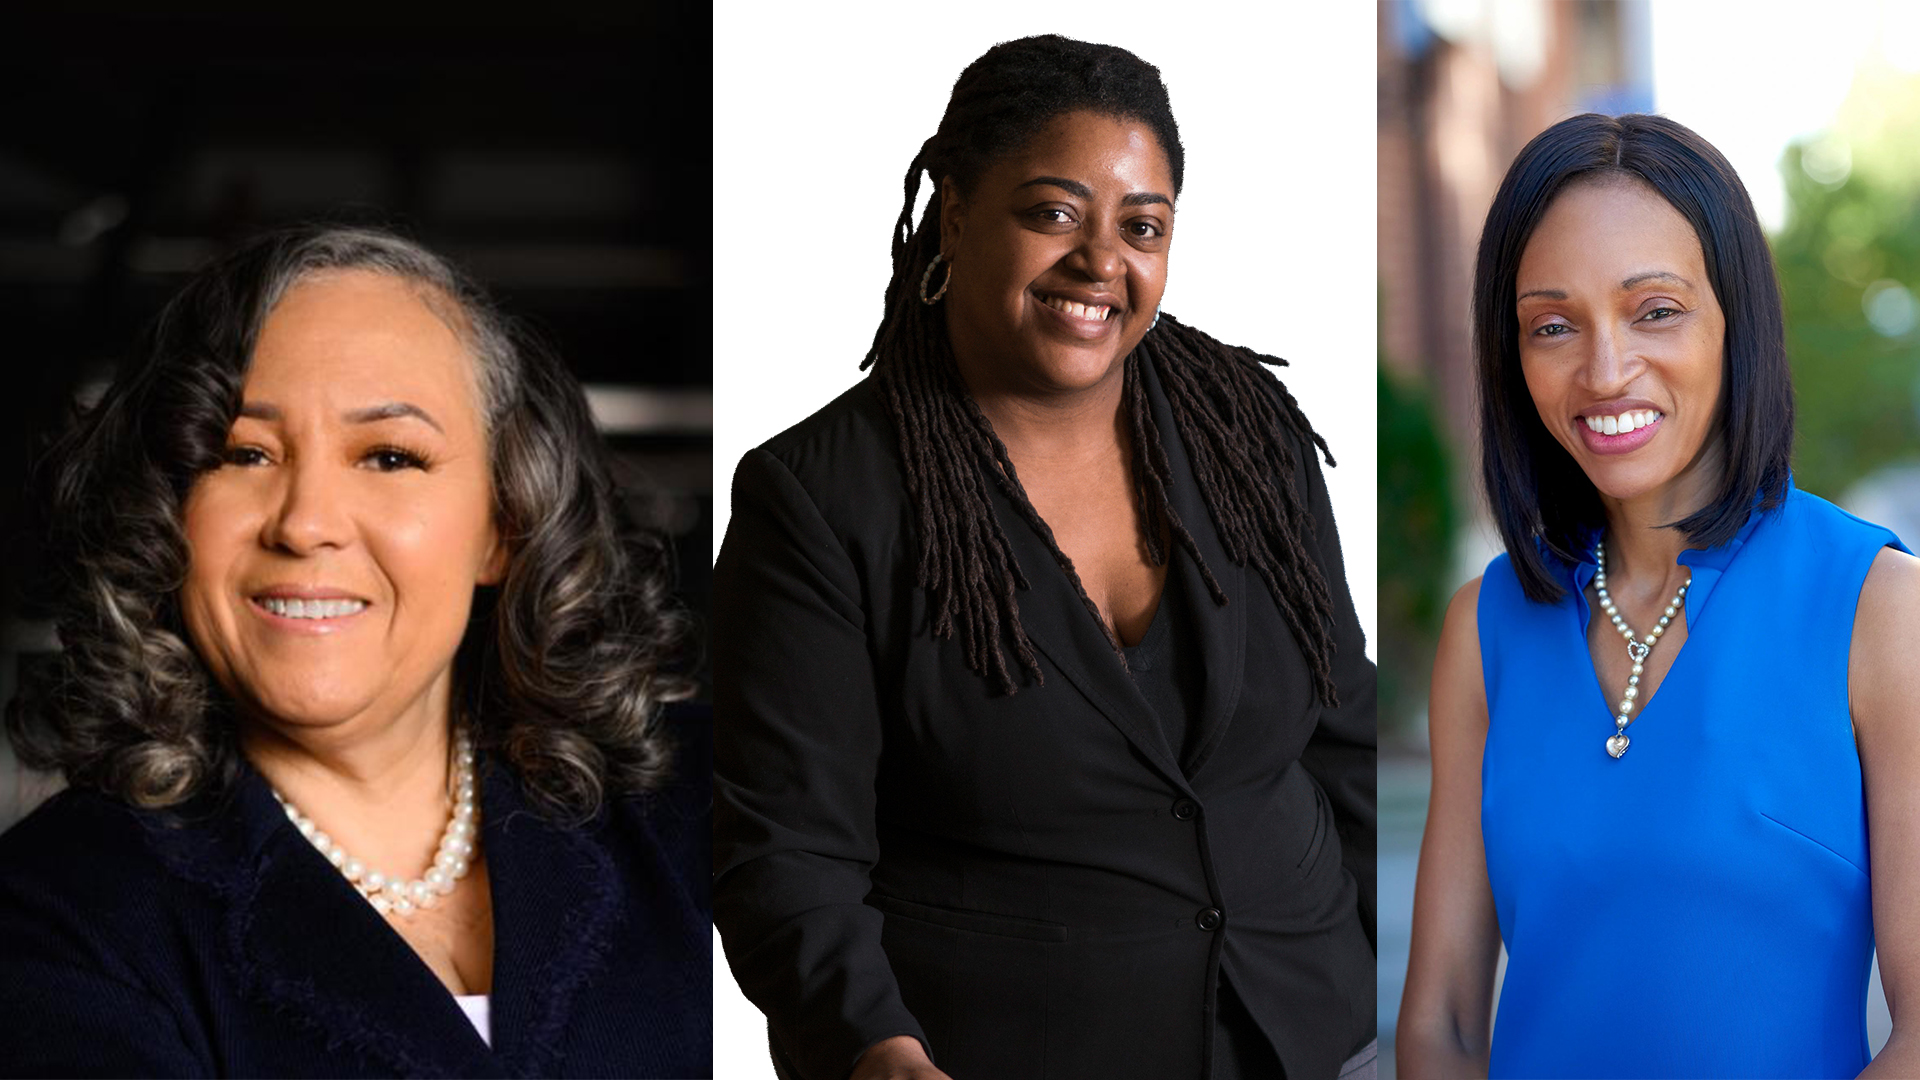 Three Black women are among Allegheny County s newly elected judges